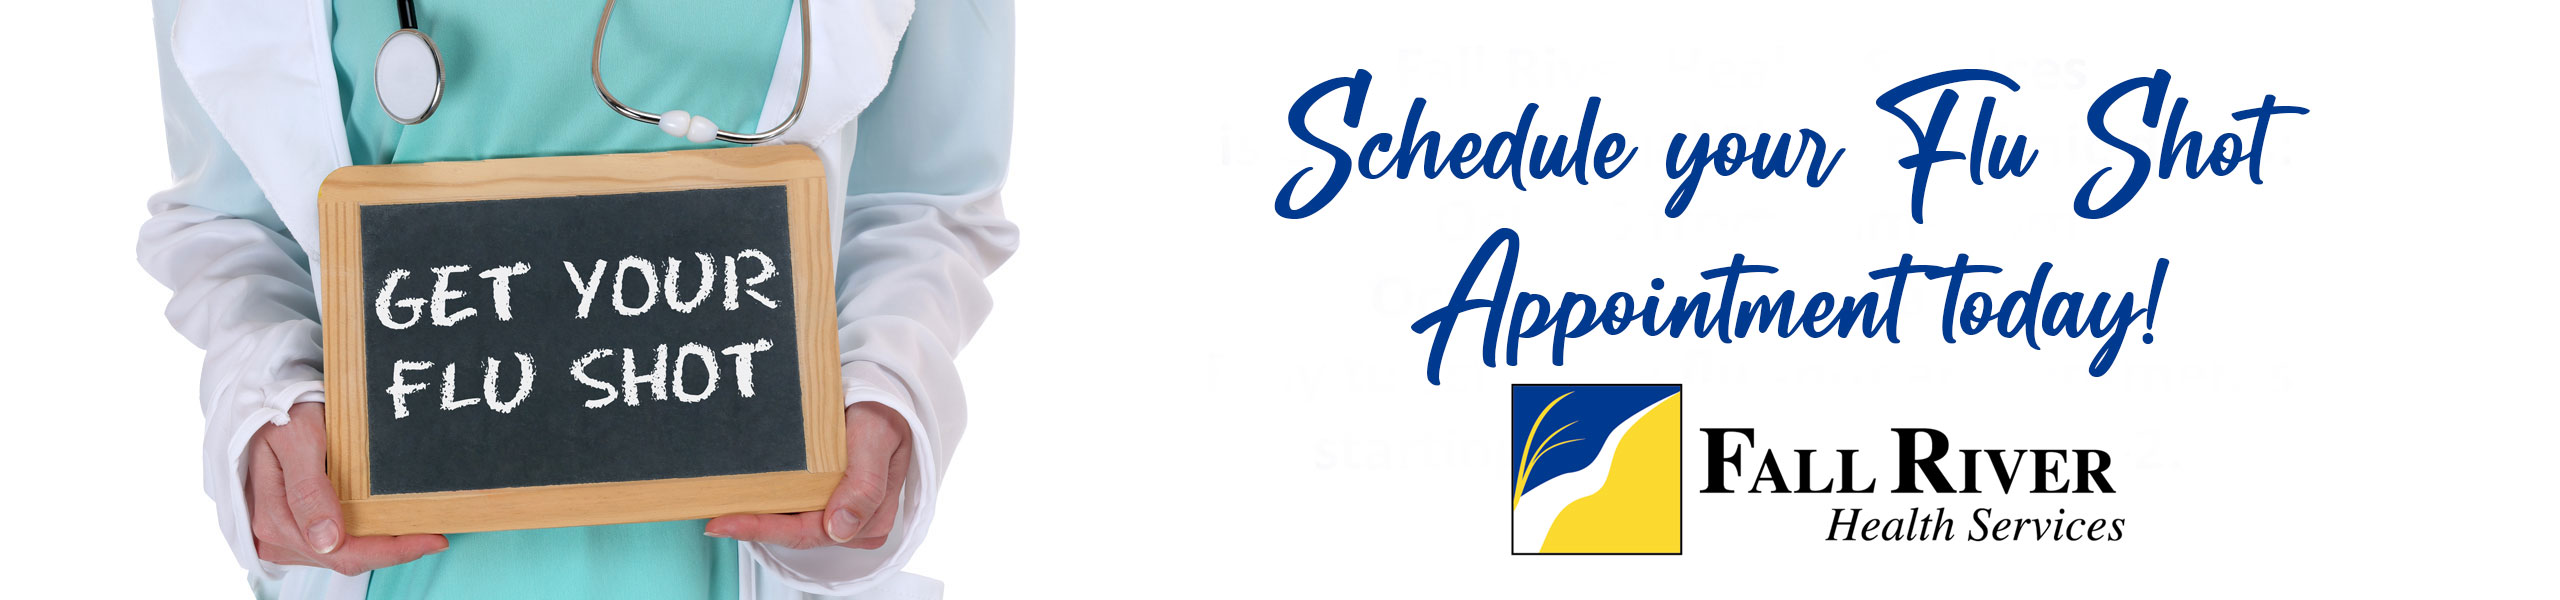 GET YOUR FLU SHOT APPOINTMENT TODAY!

Schedule your Flu Shot Appointment today!

FALL RIVER Health Services